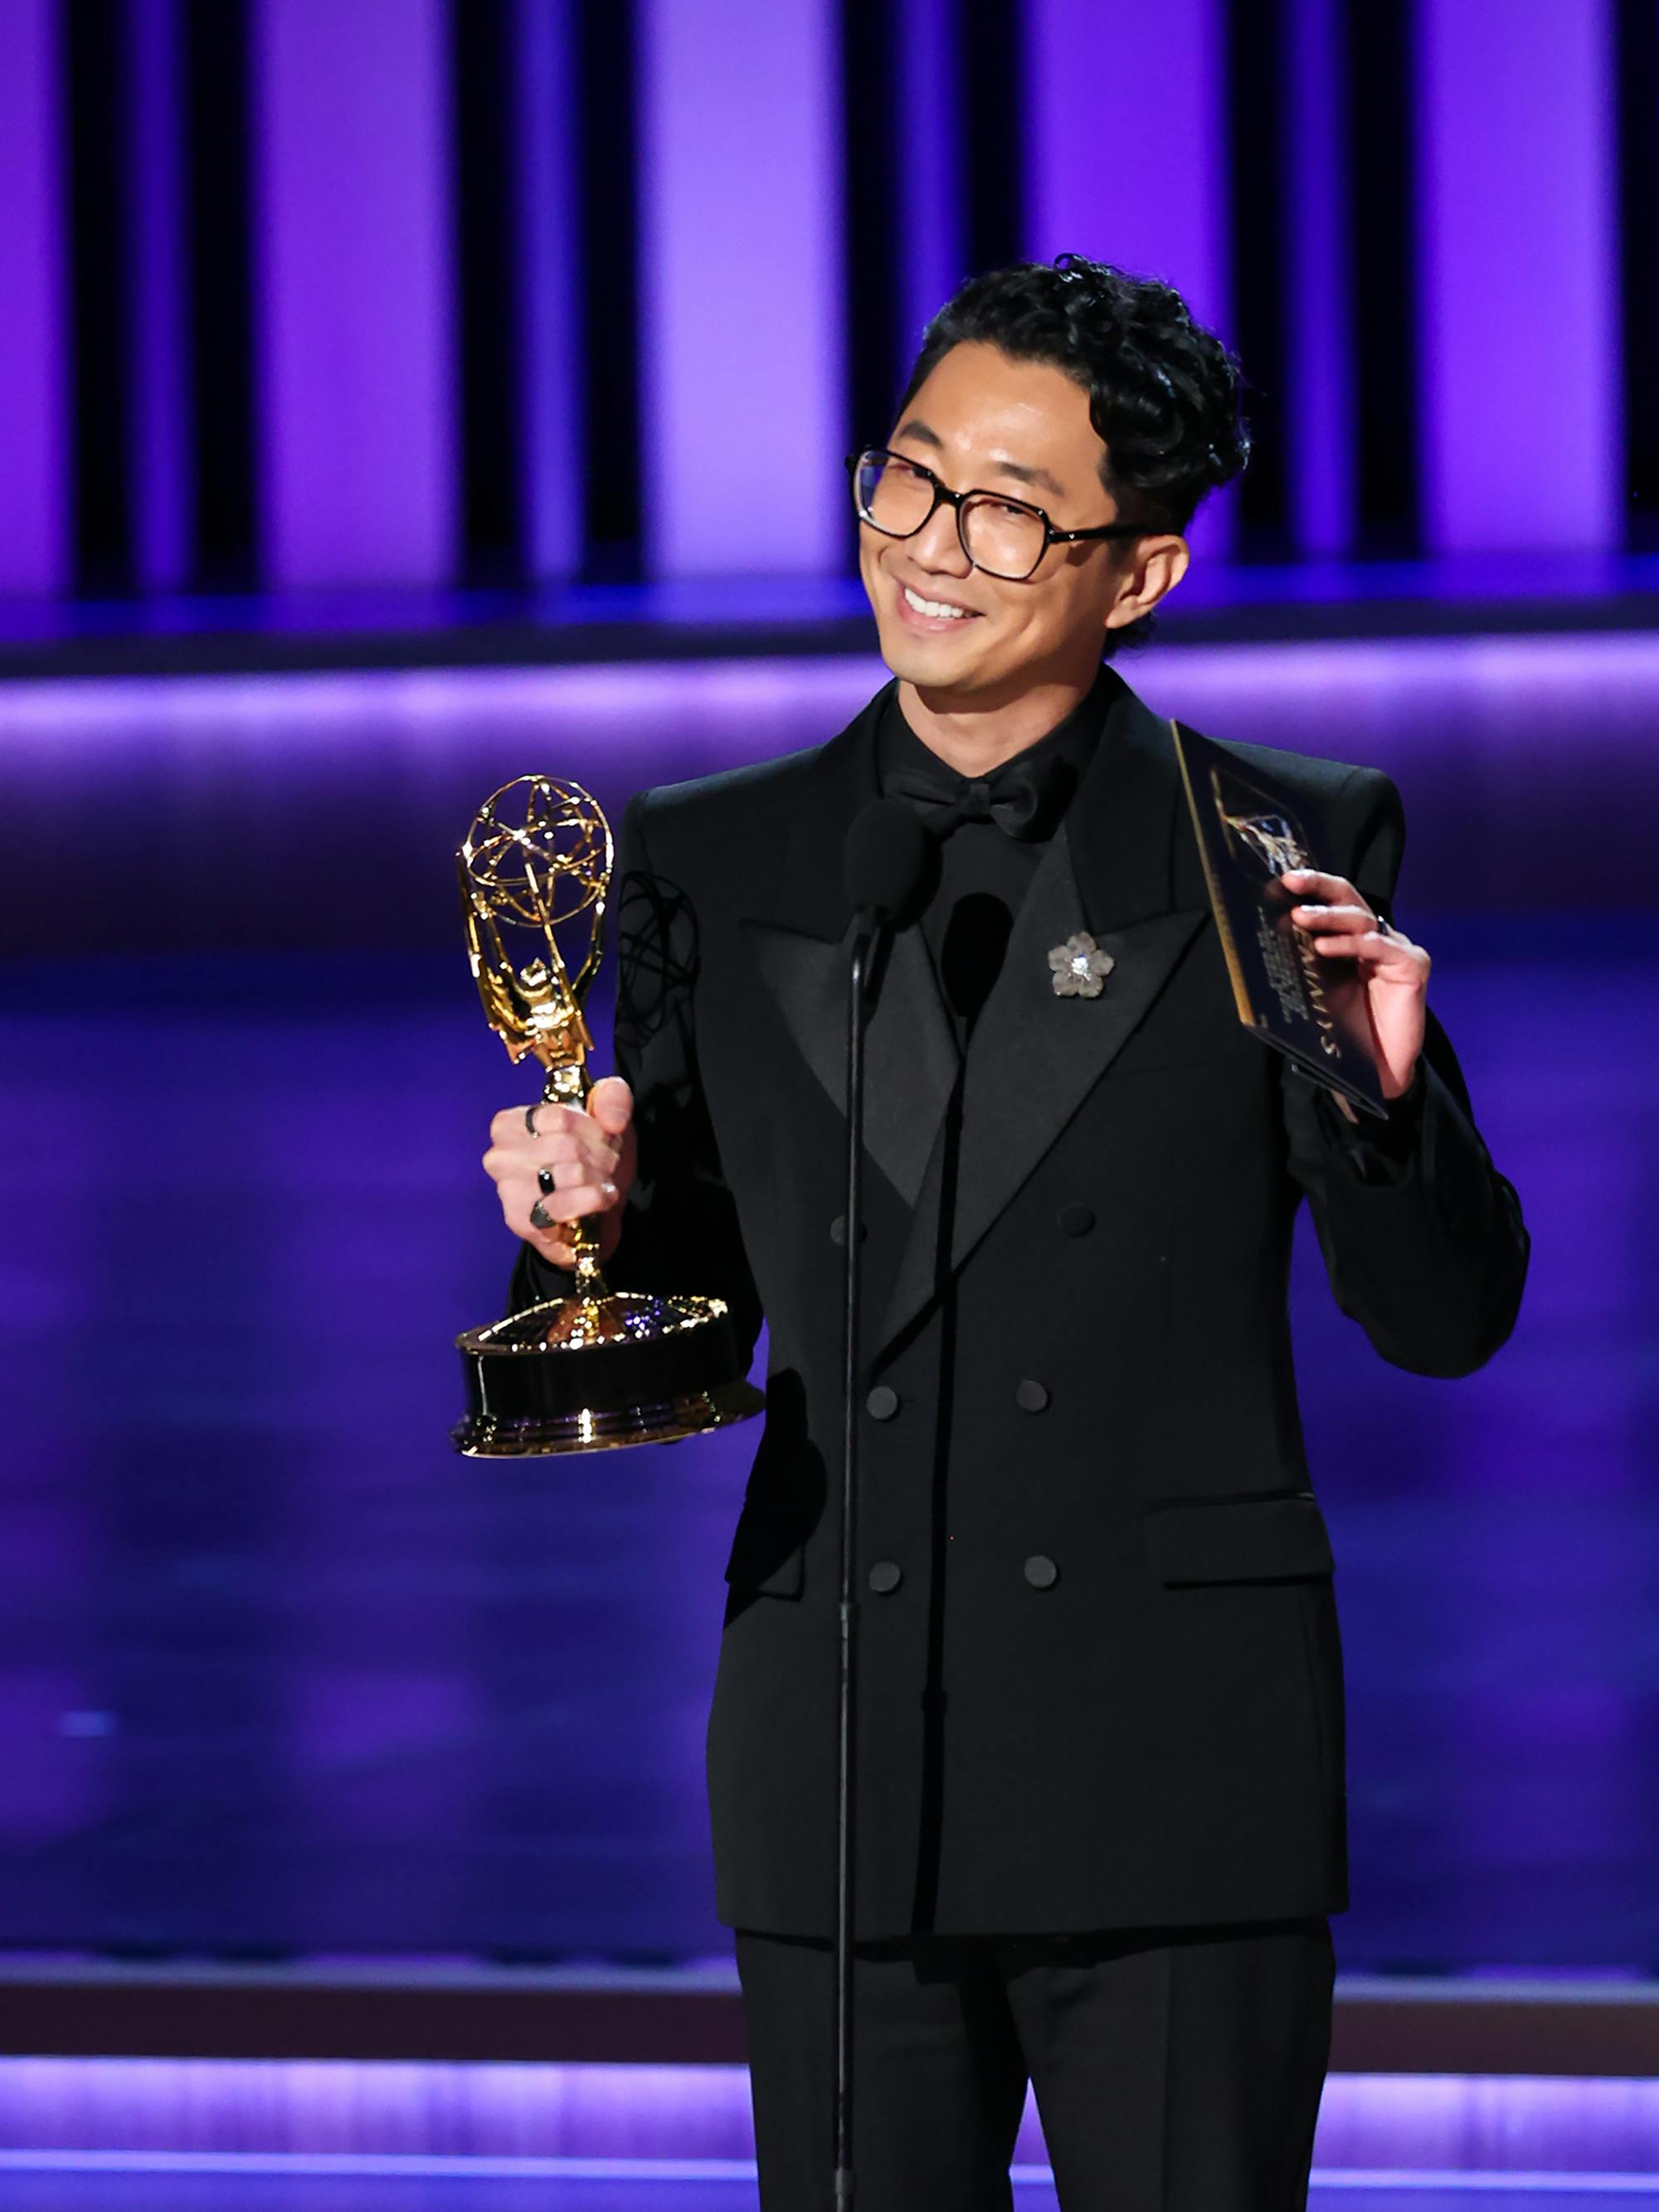 Lee Sung Jin wears all black and holds his Emmy on a purple stage.